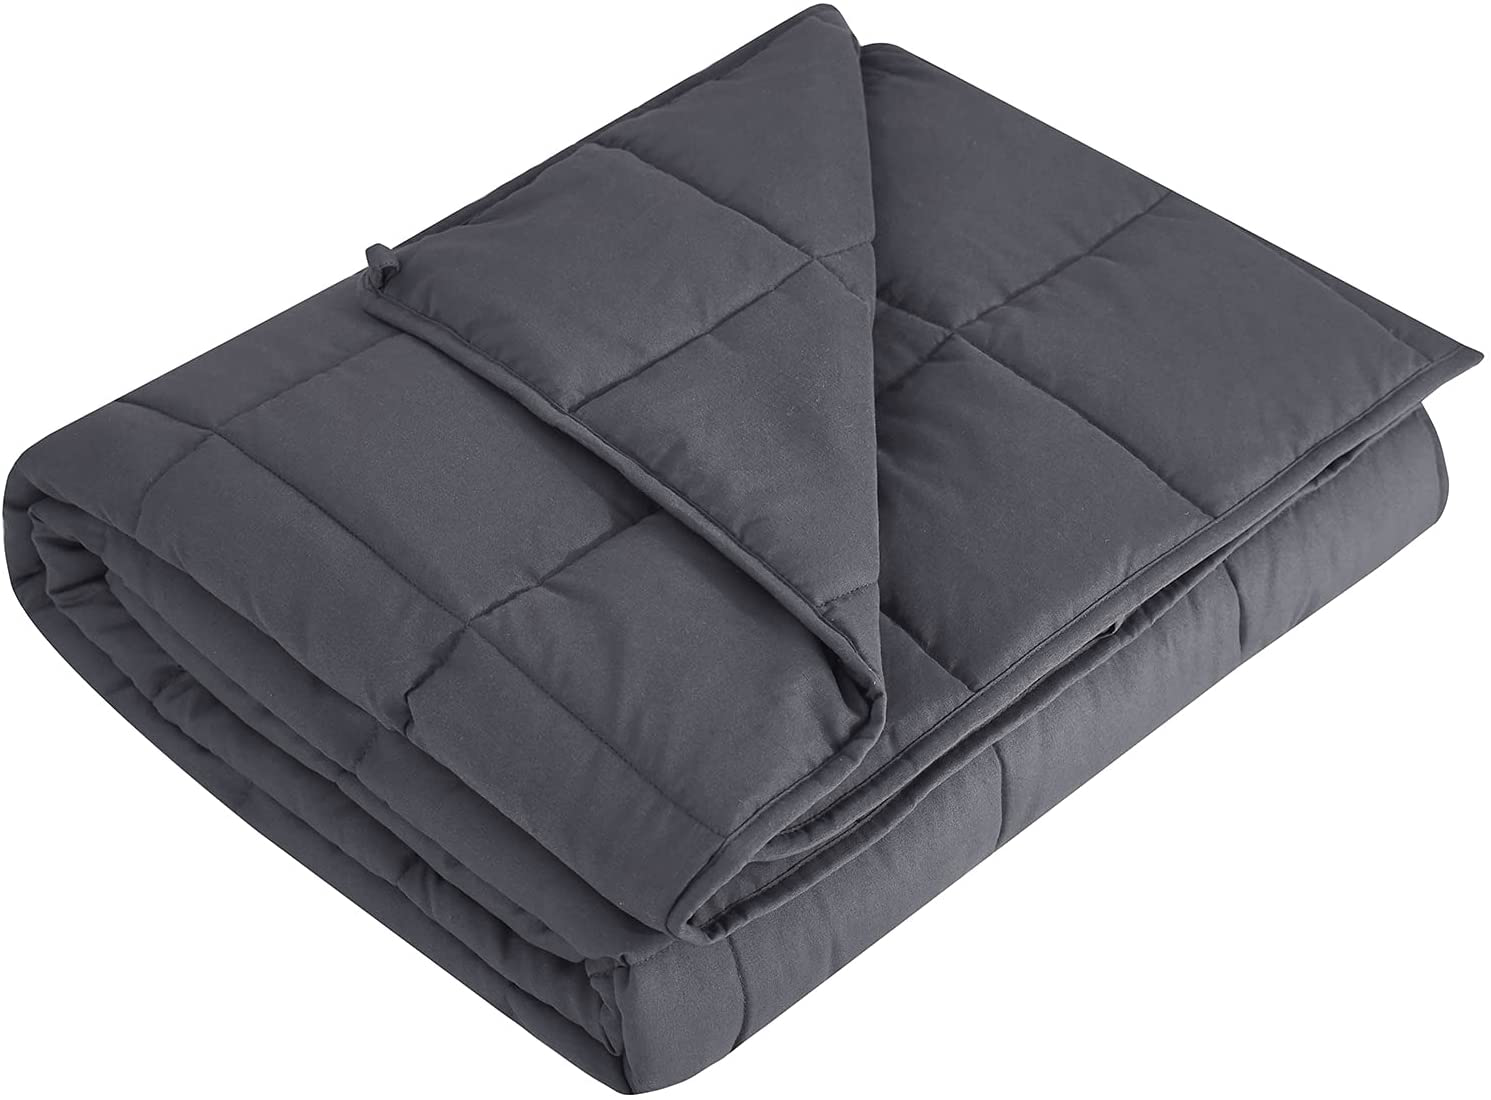 Weighted Blanket (Dark Grey,48"X72"-15Lbs) Cooling Breathable Heavy Blanket Microfiber Material with Glass Beads Big Blanket for Adult All-Season Summer Fall Winter Soft Thick Comfort Blanket